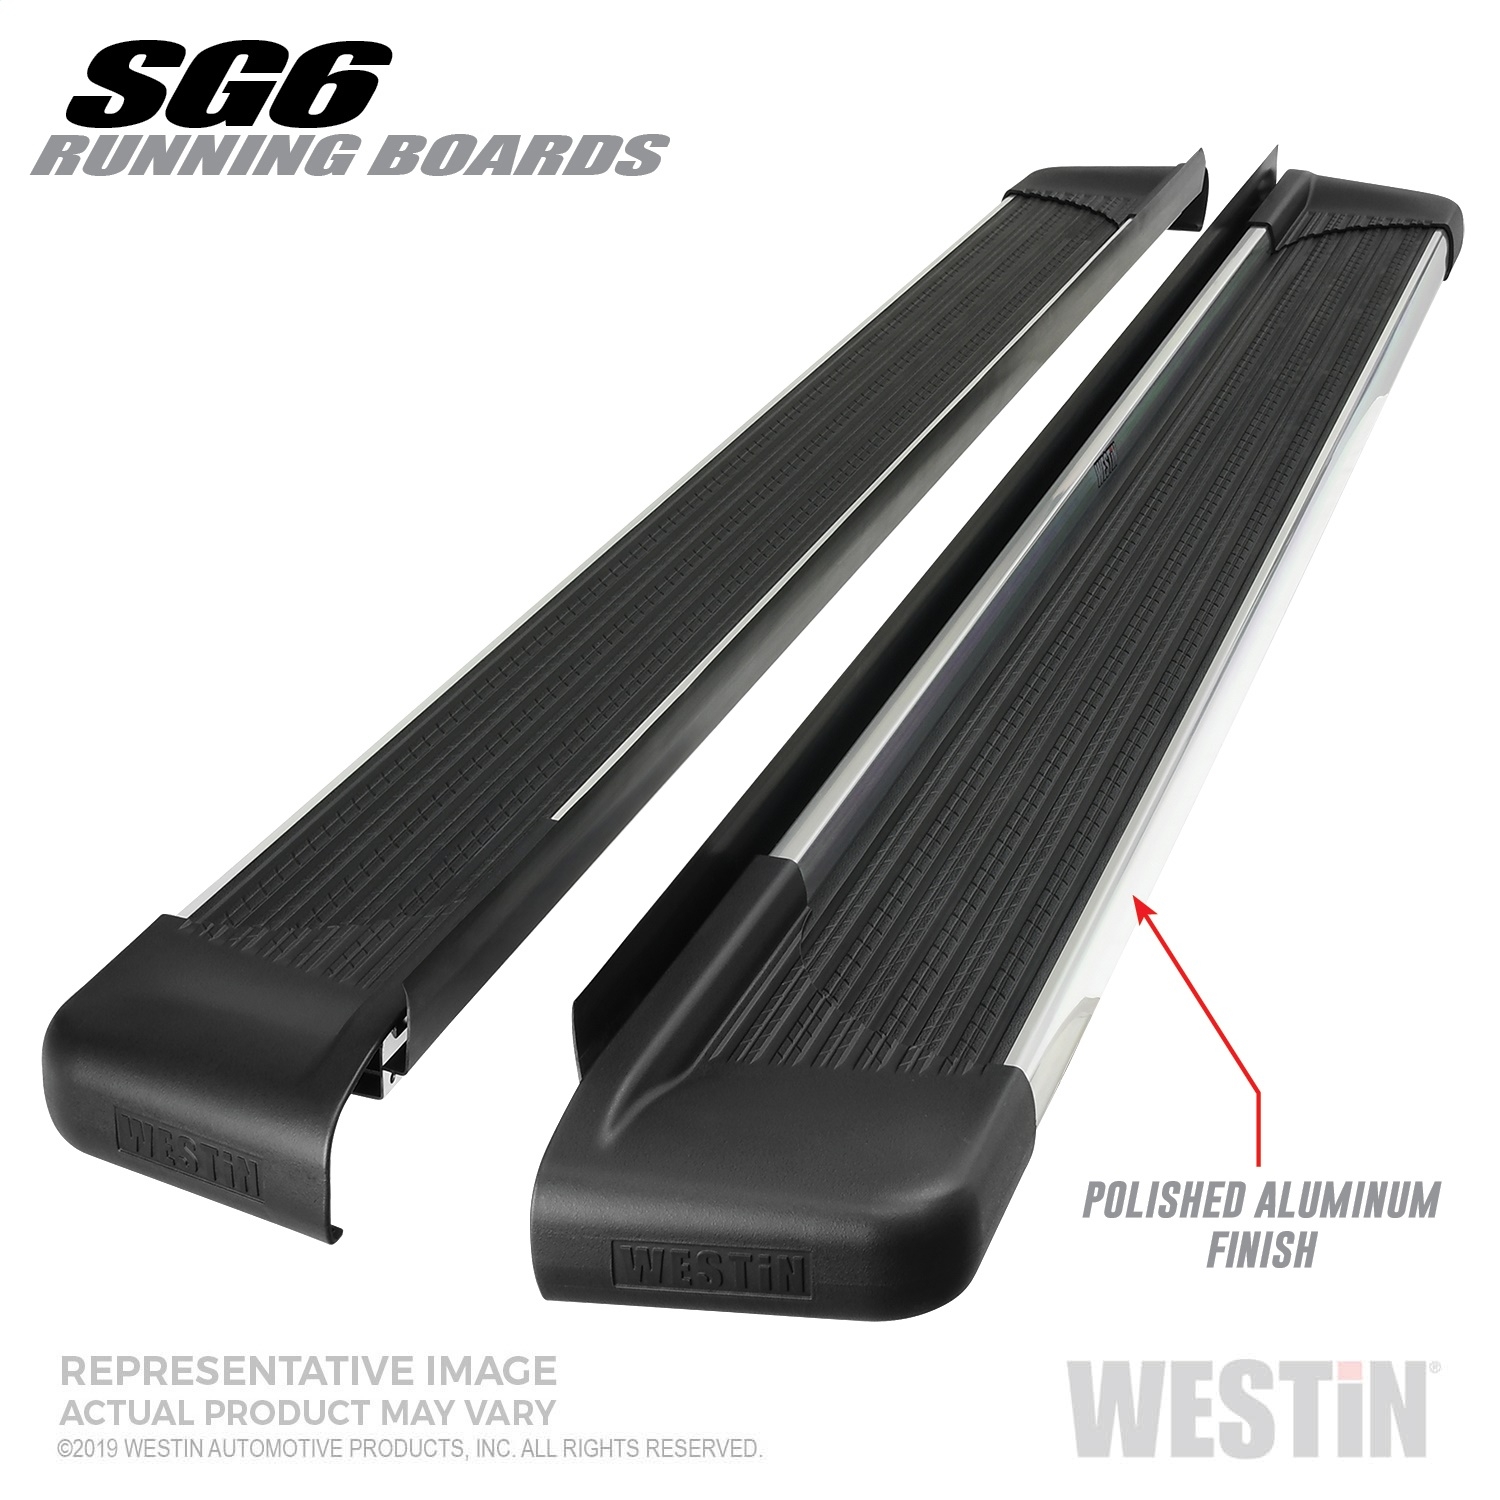 Westin Sg6 Running Boards, Polished Aluminum, 68.40 In. Length, Does Not Include Mount Kit, Vehicle